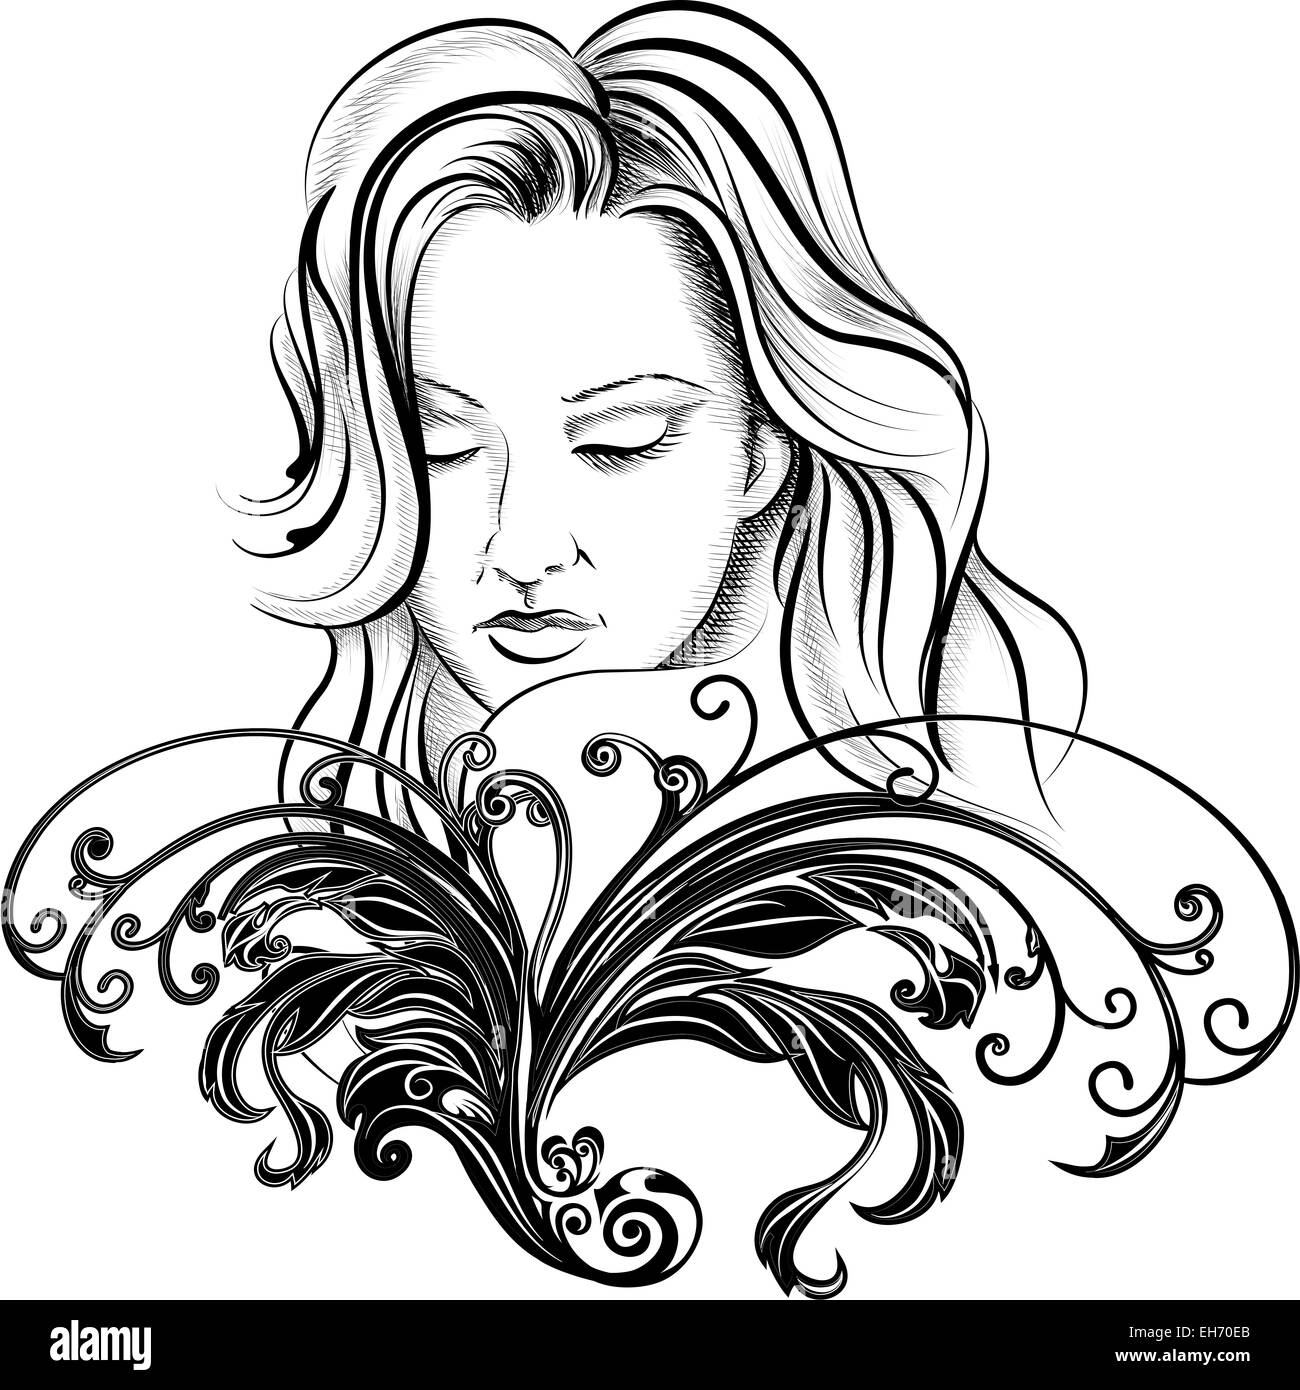 Illustration with young woman face behind floral swirls drawn in handmade ink style. Stock Photo